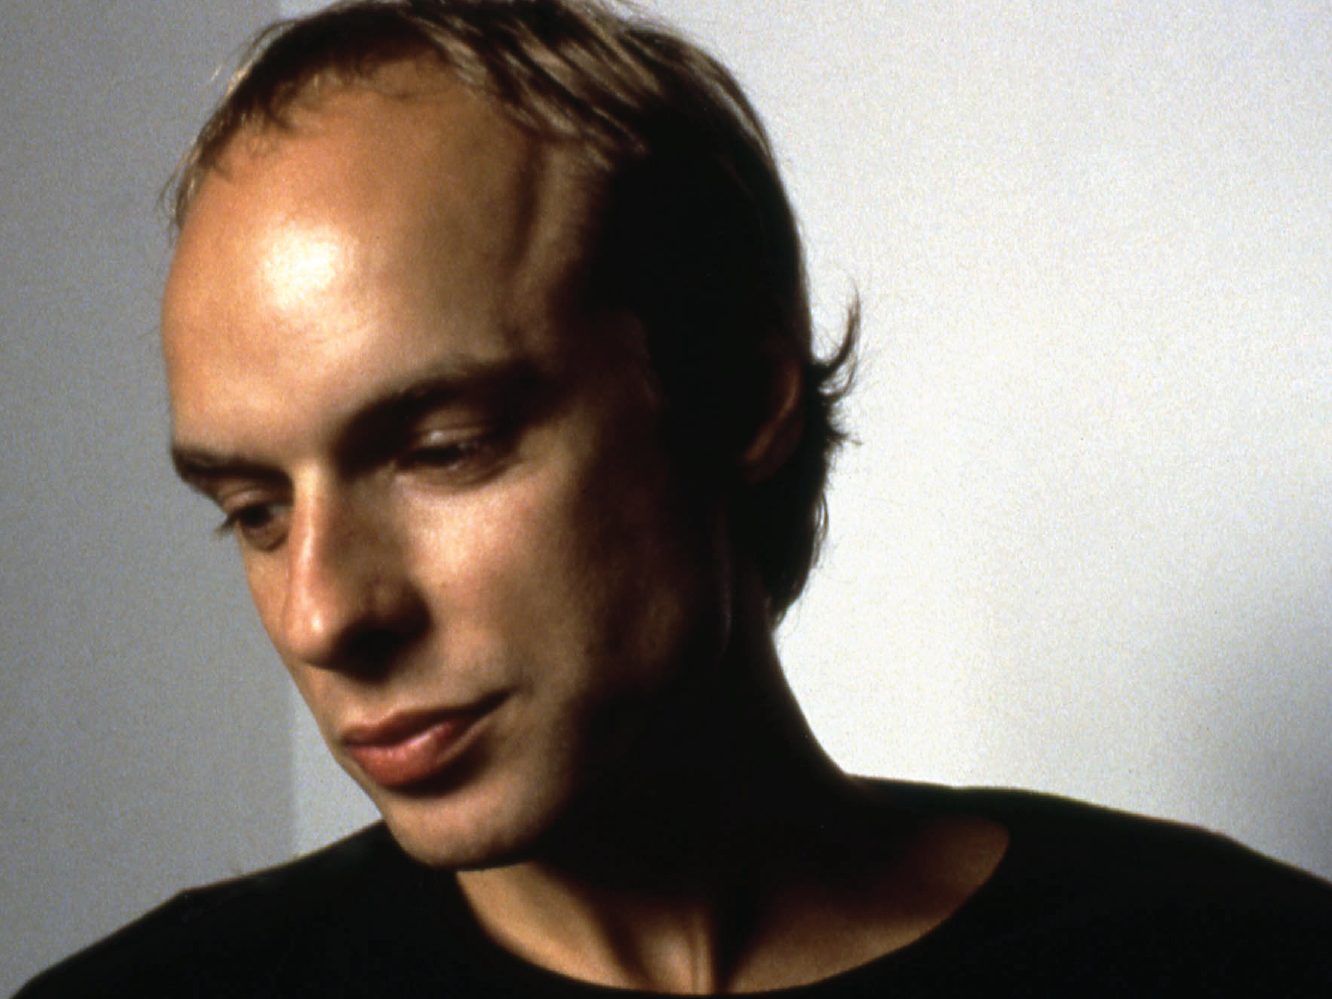 The Origins and Influence of Brian Eno’s Pioneering Album Ambient 1: Music for Airports